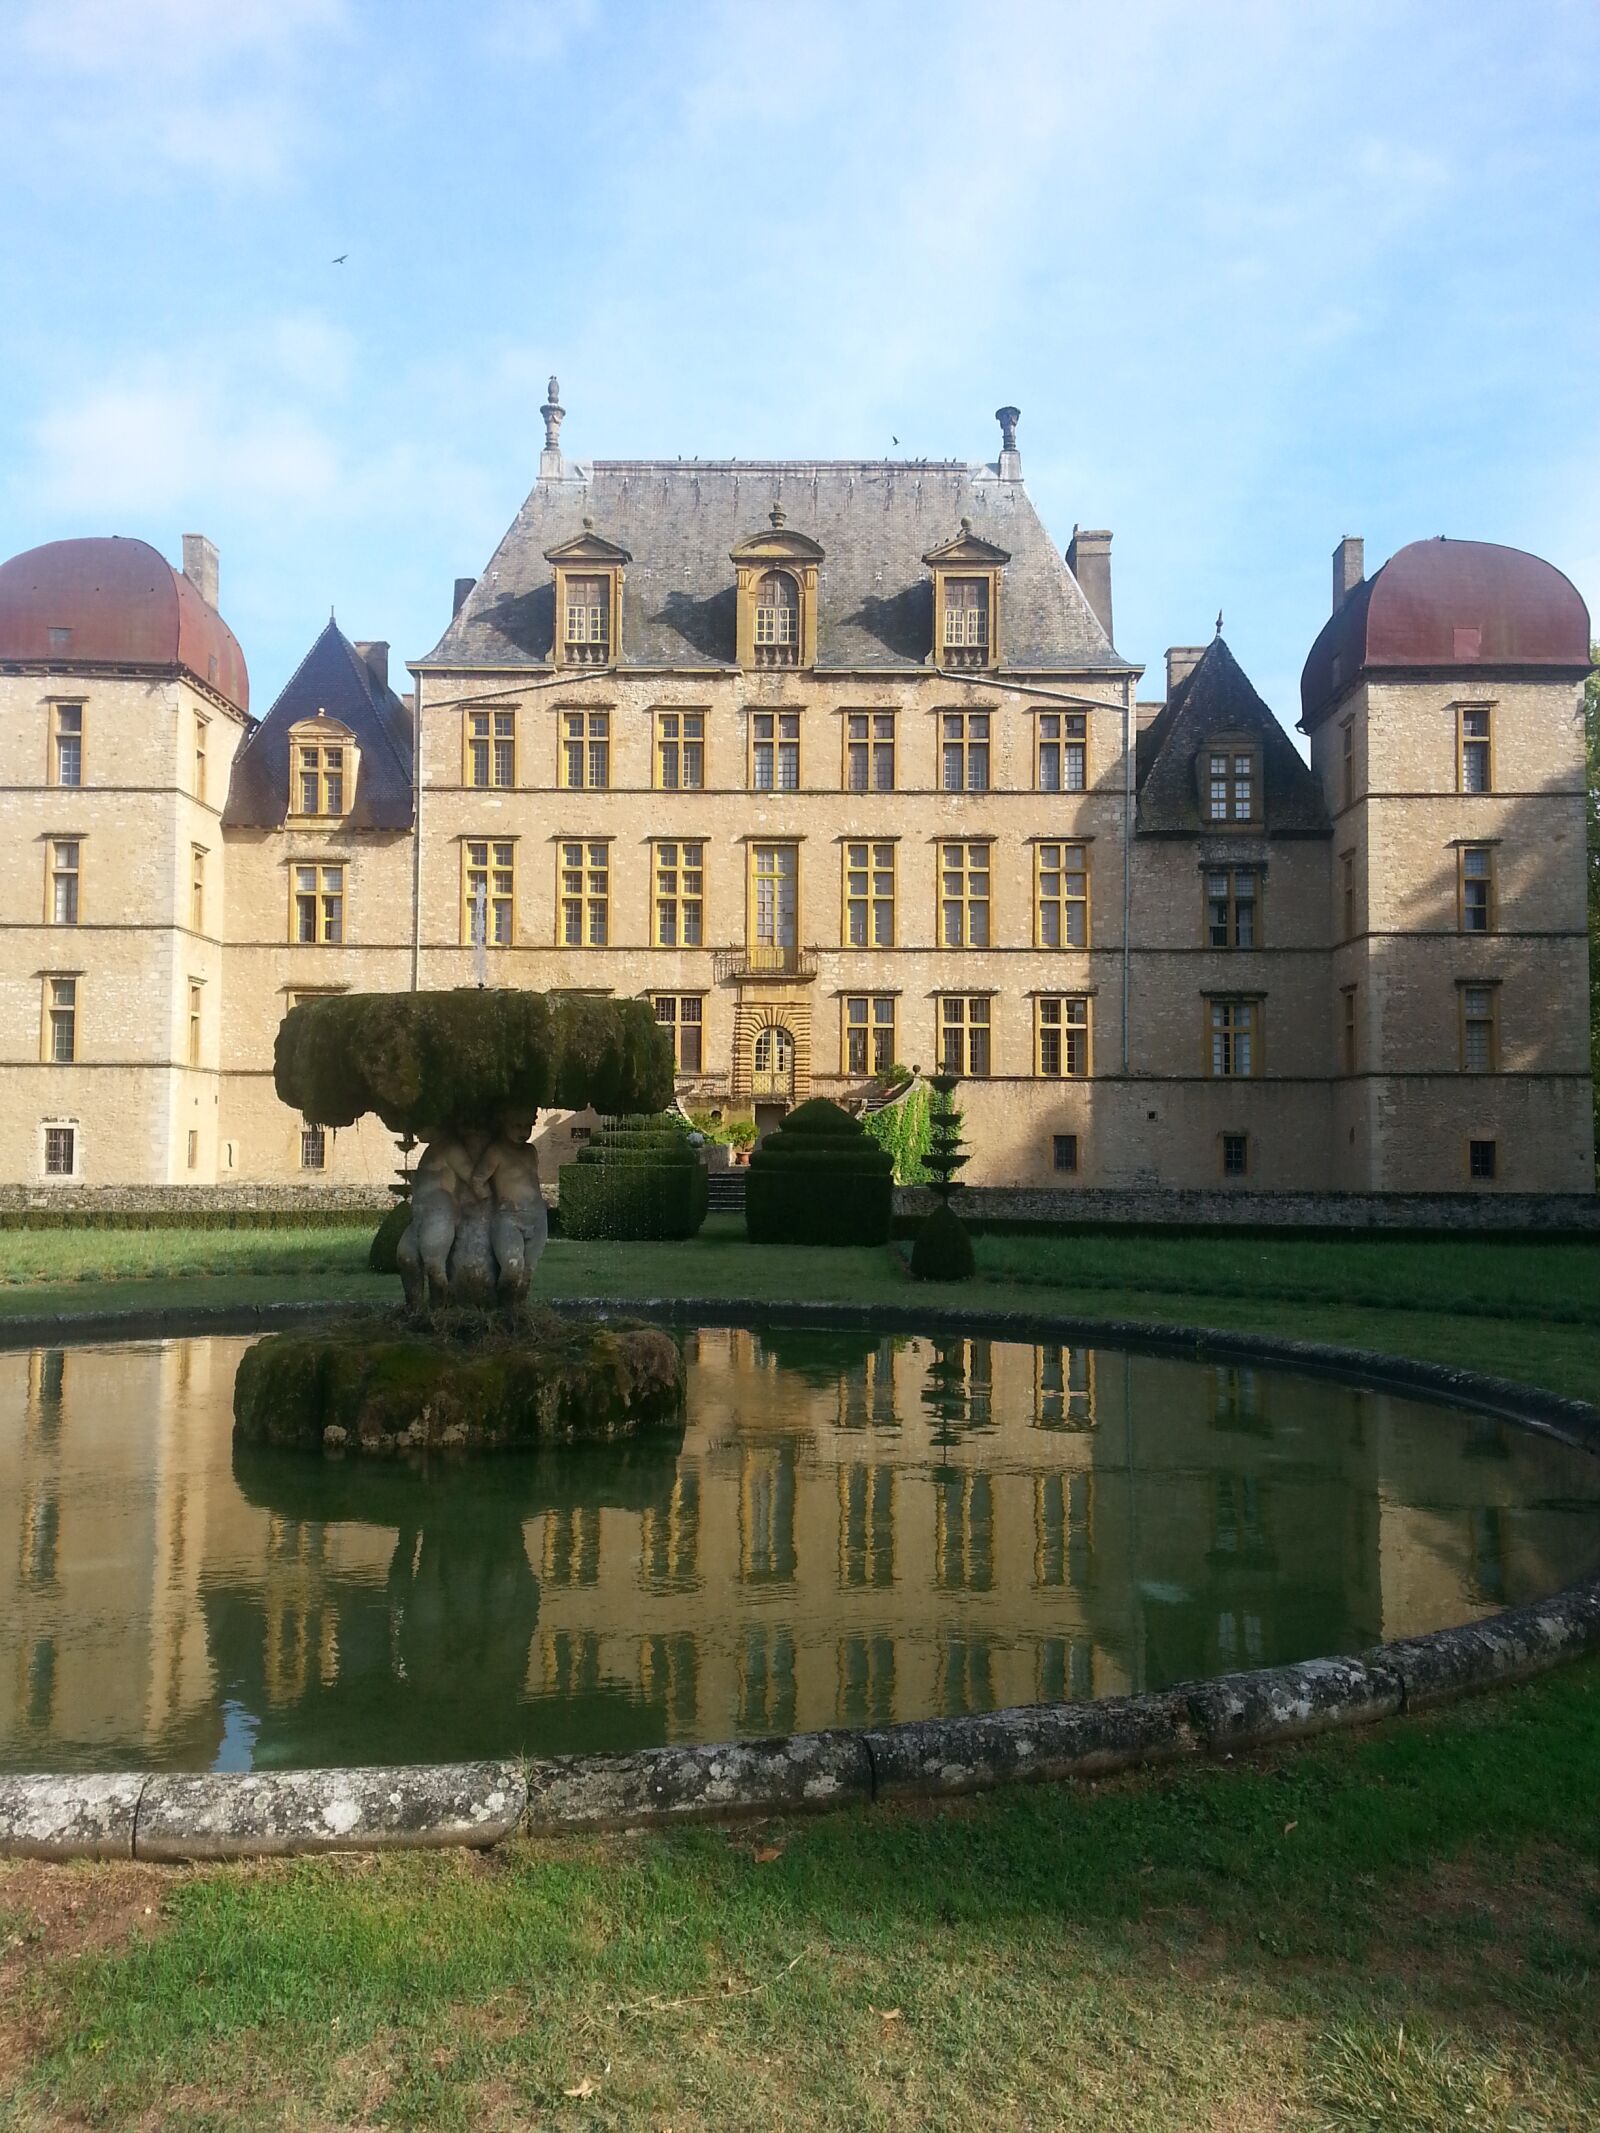 Samsung Galaxy S3 sample photo. France, chateau, architecture photography